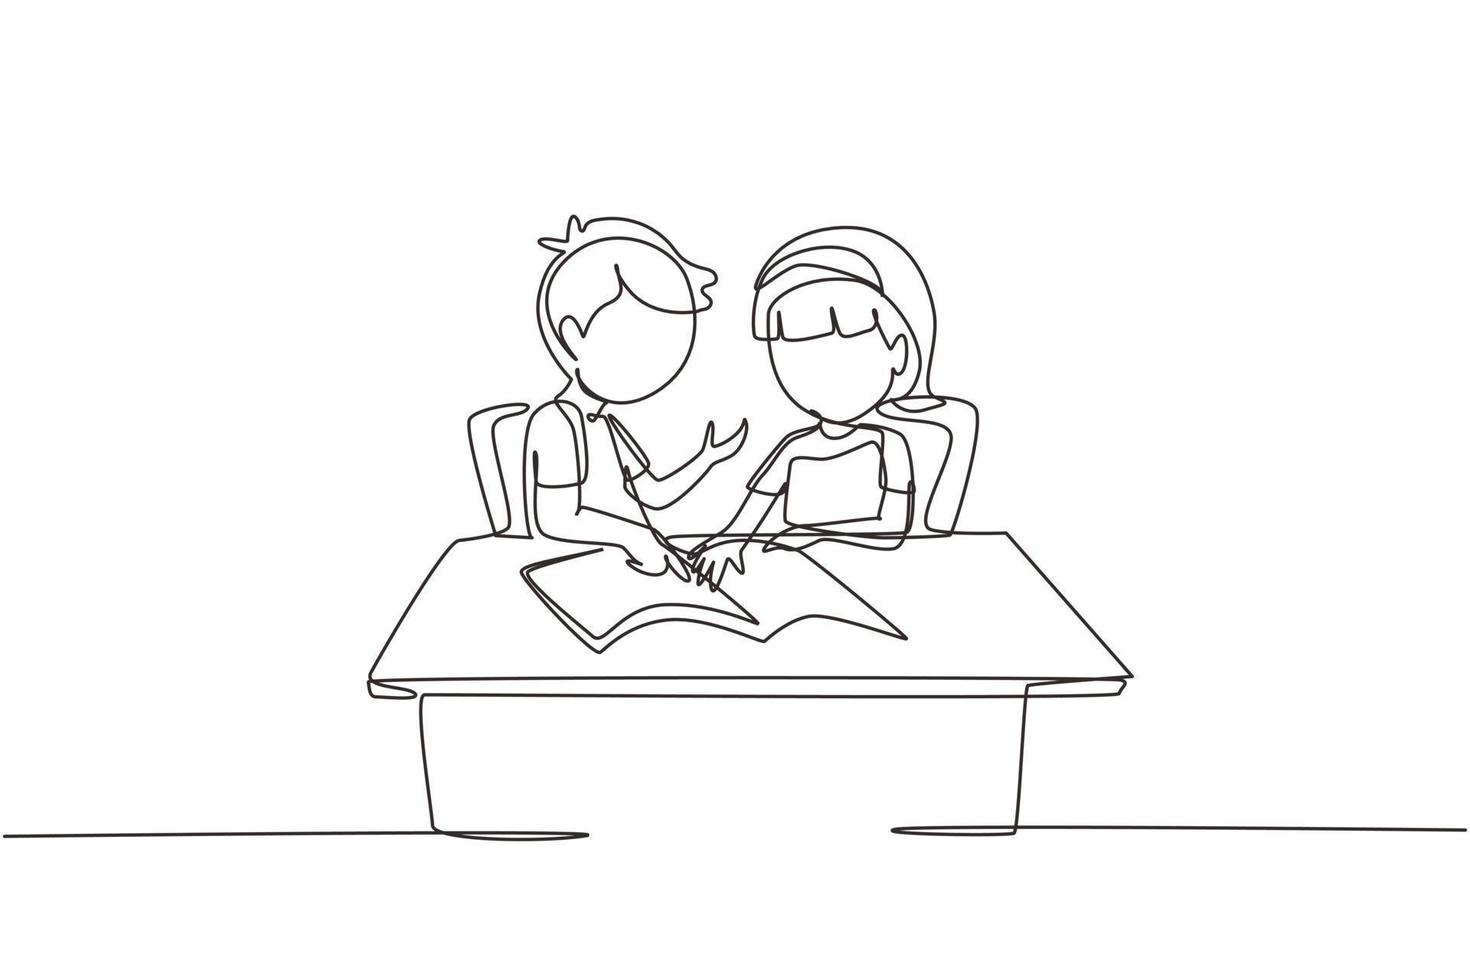 Continuous one line drawing children pupils studying together while boy explains to girl pointing at their notebook. Kids makes homework from school. Single line design vector graphic illustration